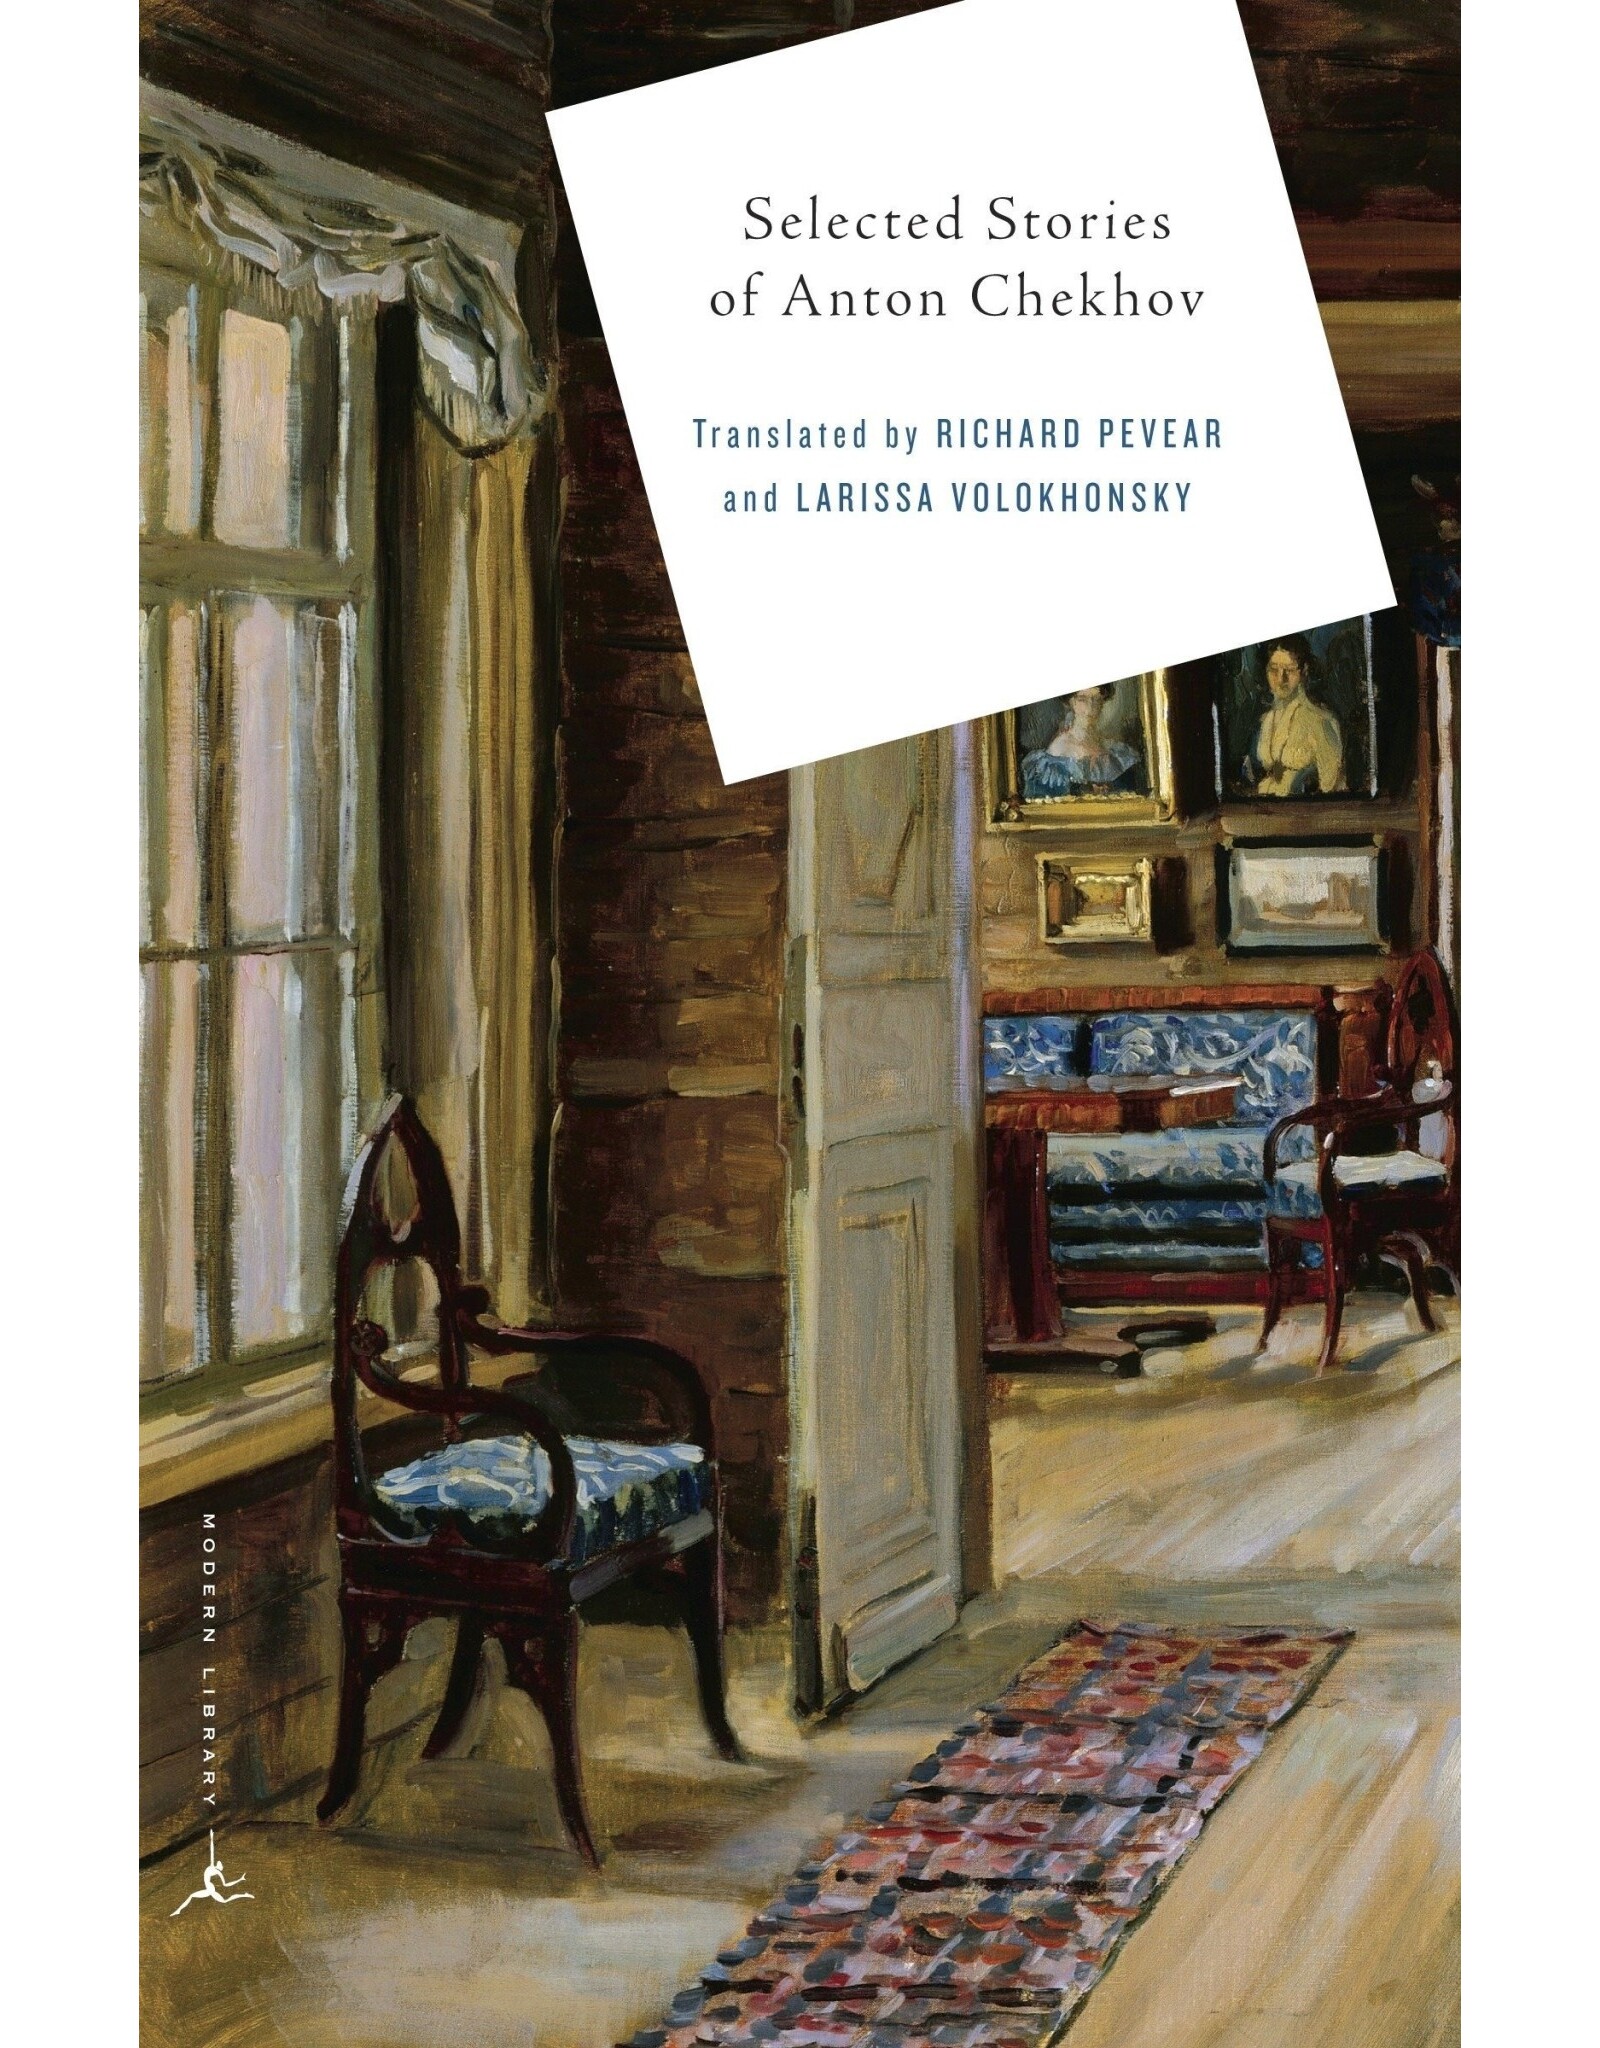 The Selected Stories of Anton Chekhov